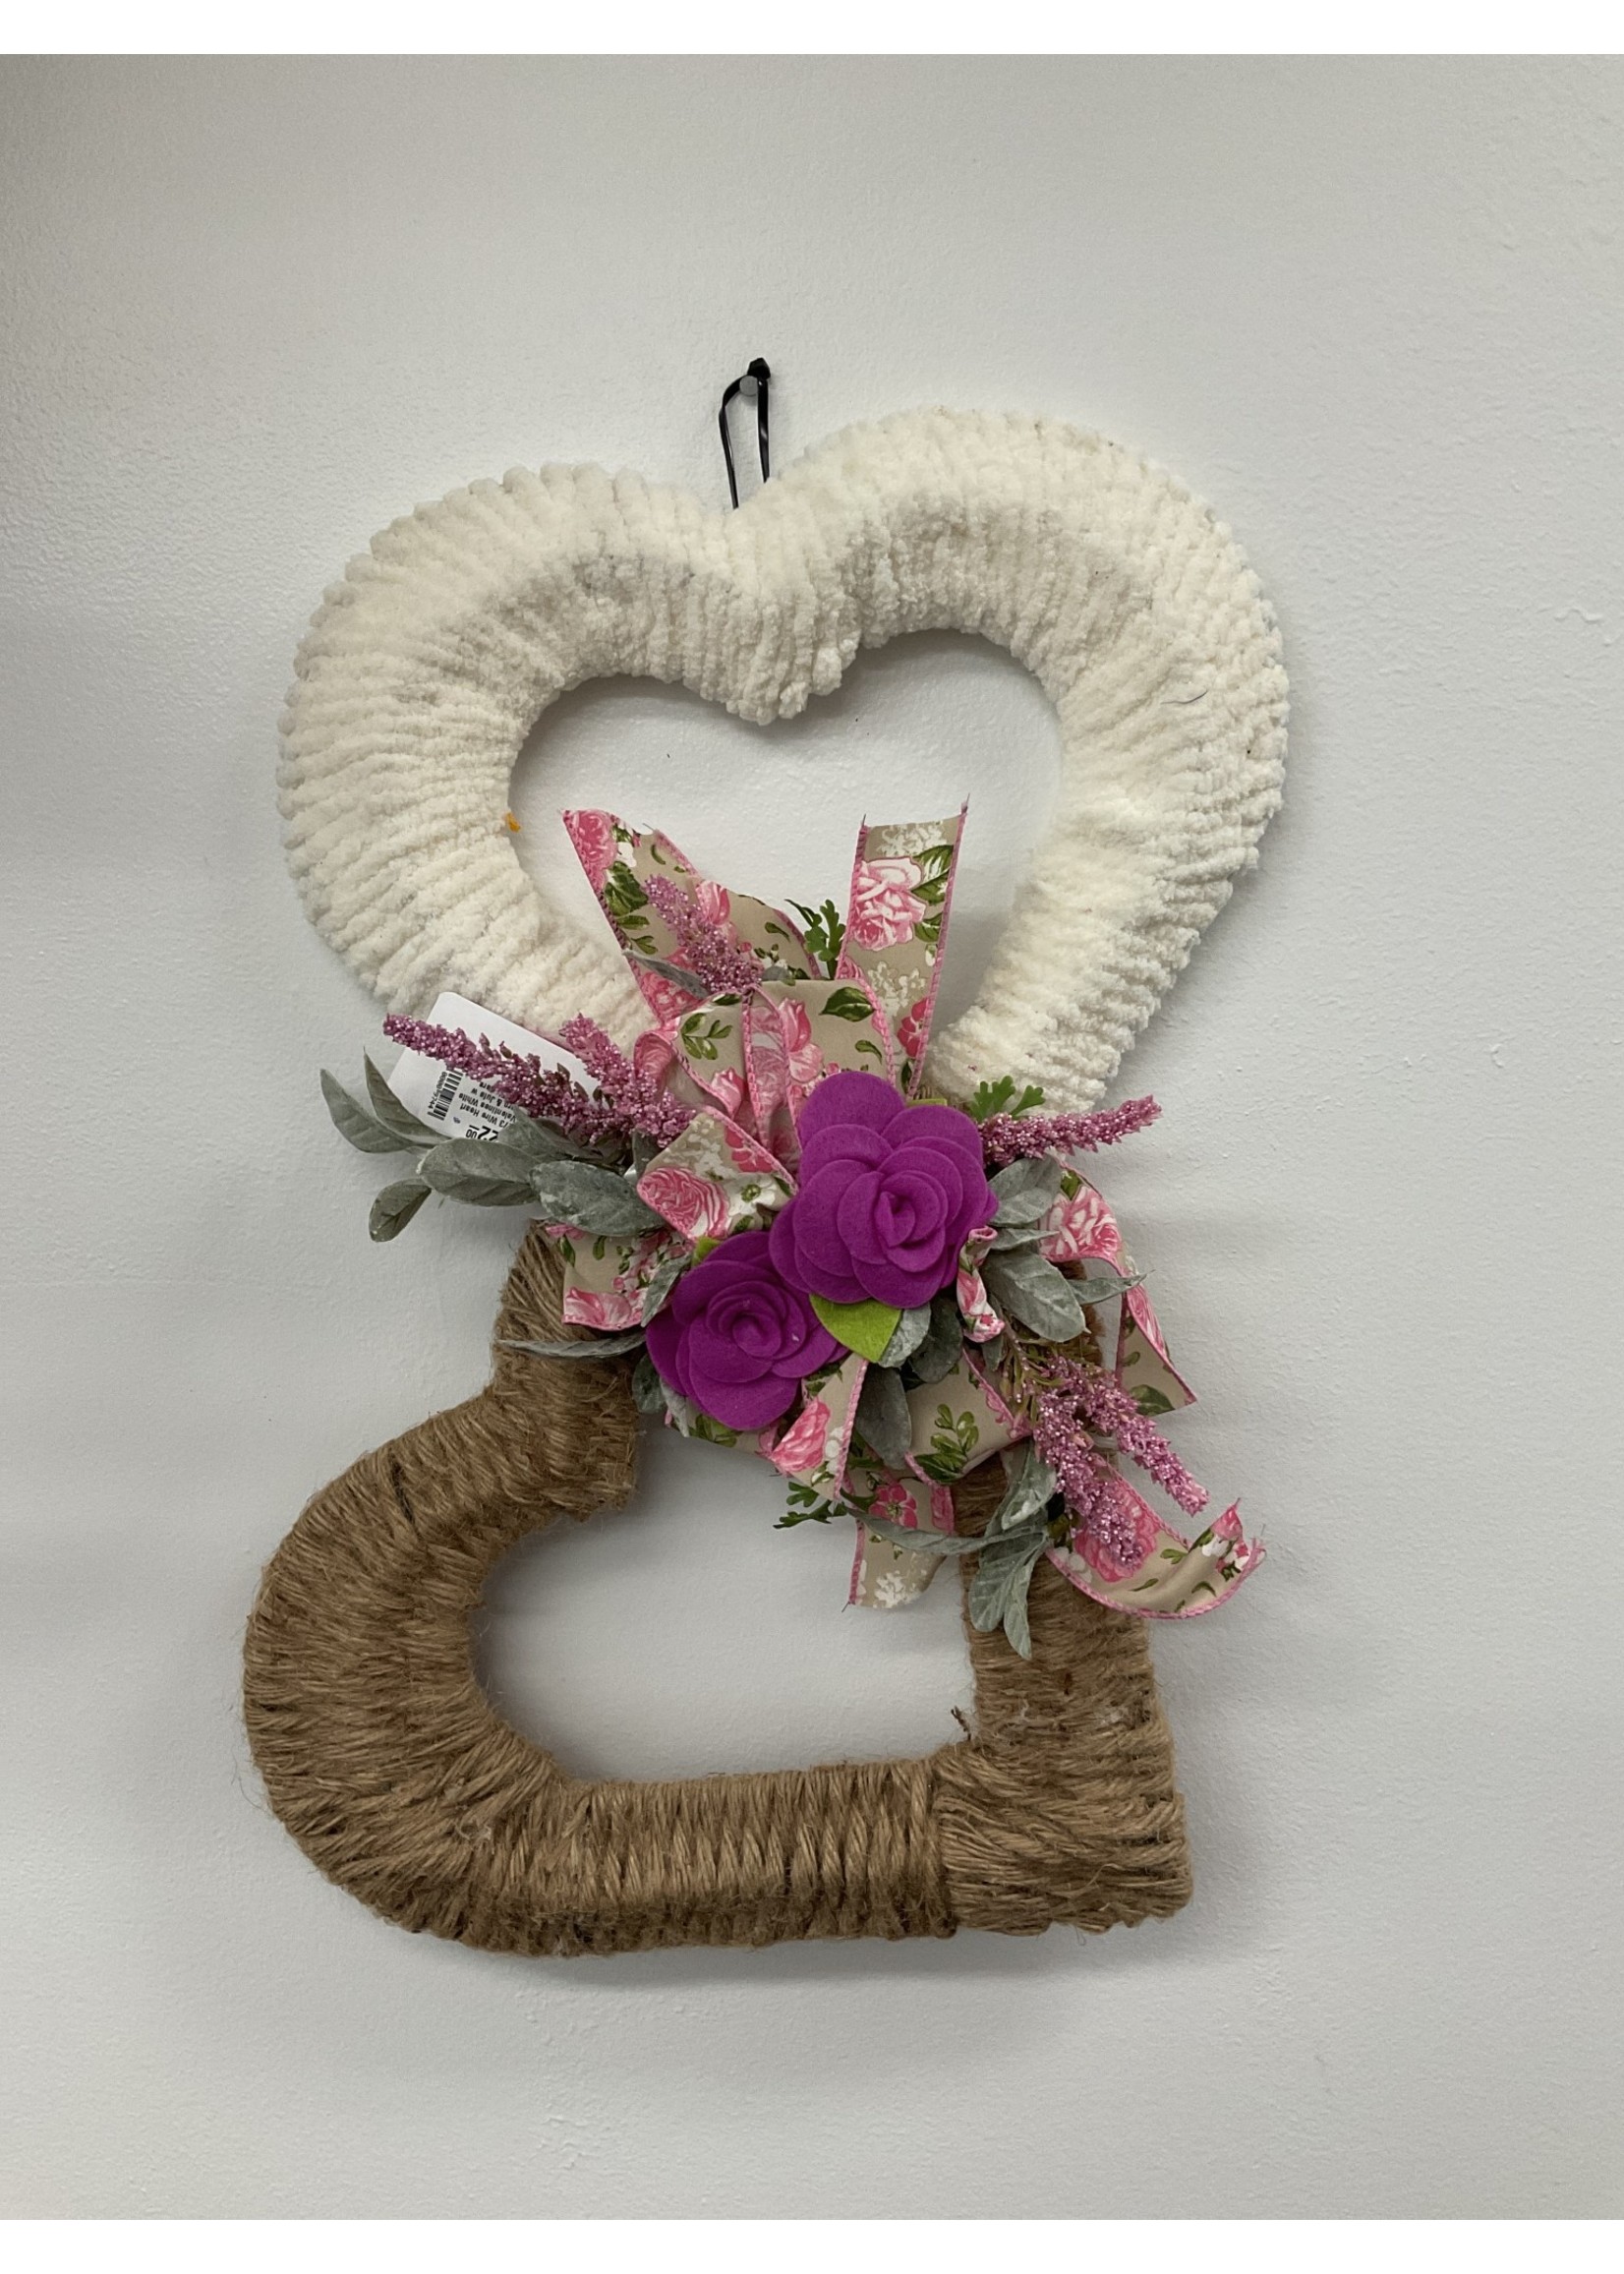 Wreath White Yarn/Jute Heart Frame with Pink Flowers and Rose Ribbon - My  New Favorite Thing Decor